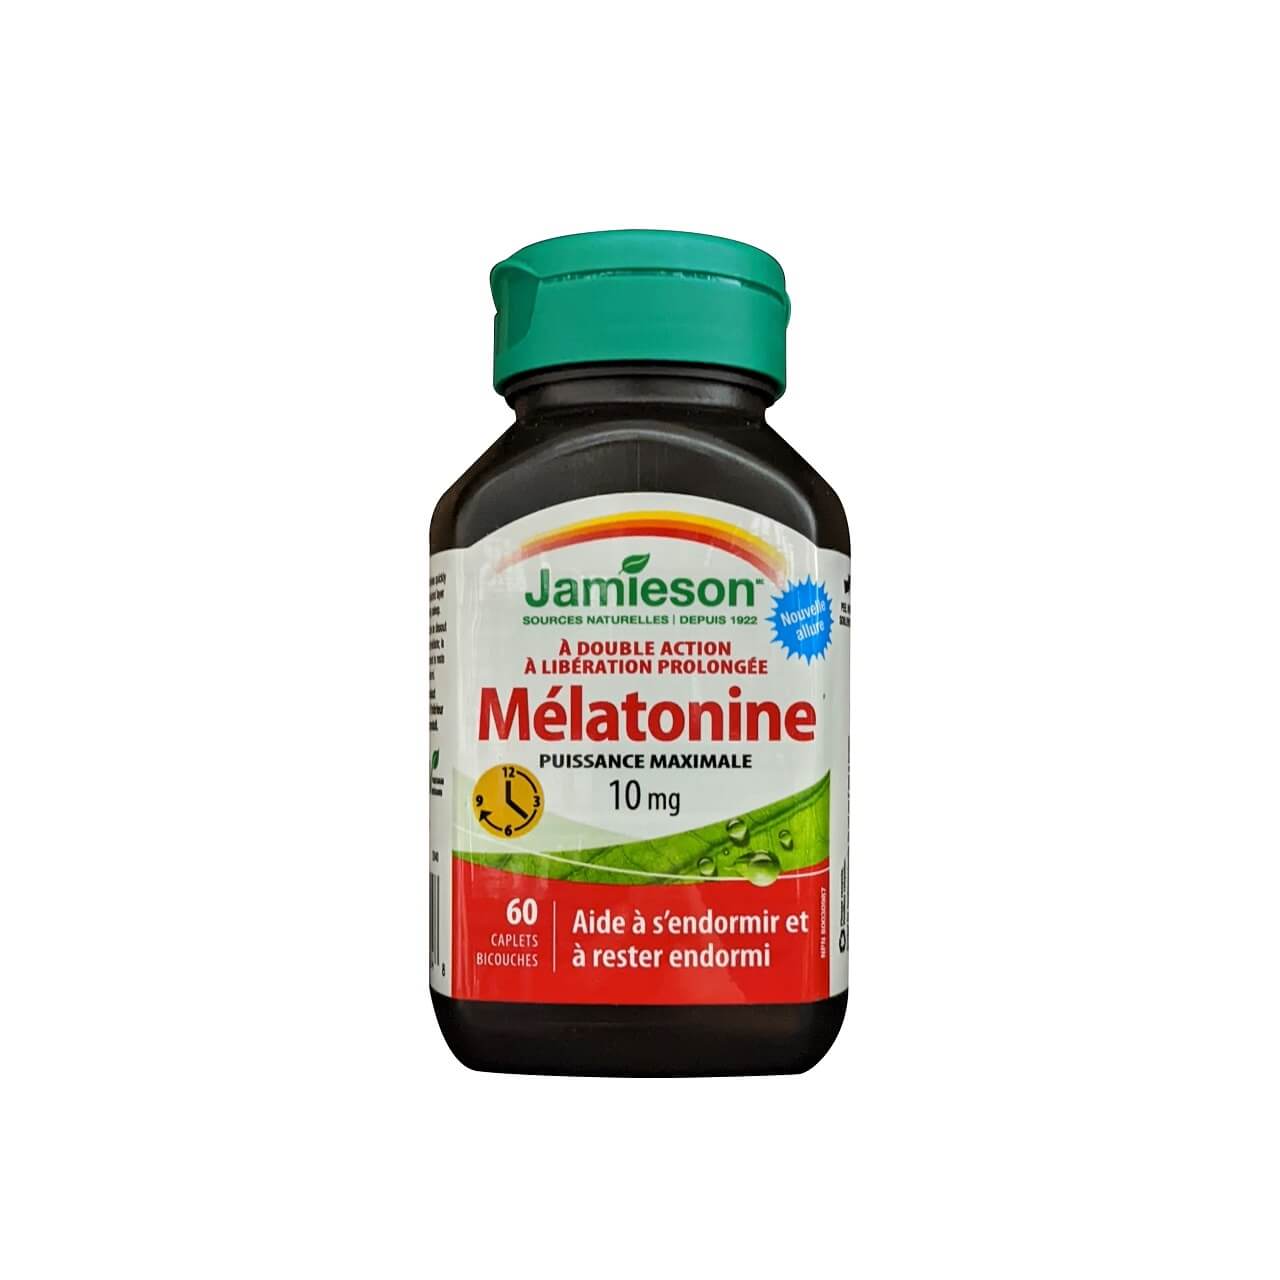 Product label for Jamieson Melatonin 10 mg Maximum Strength Dual Action Timed Release (60 caplets) in French